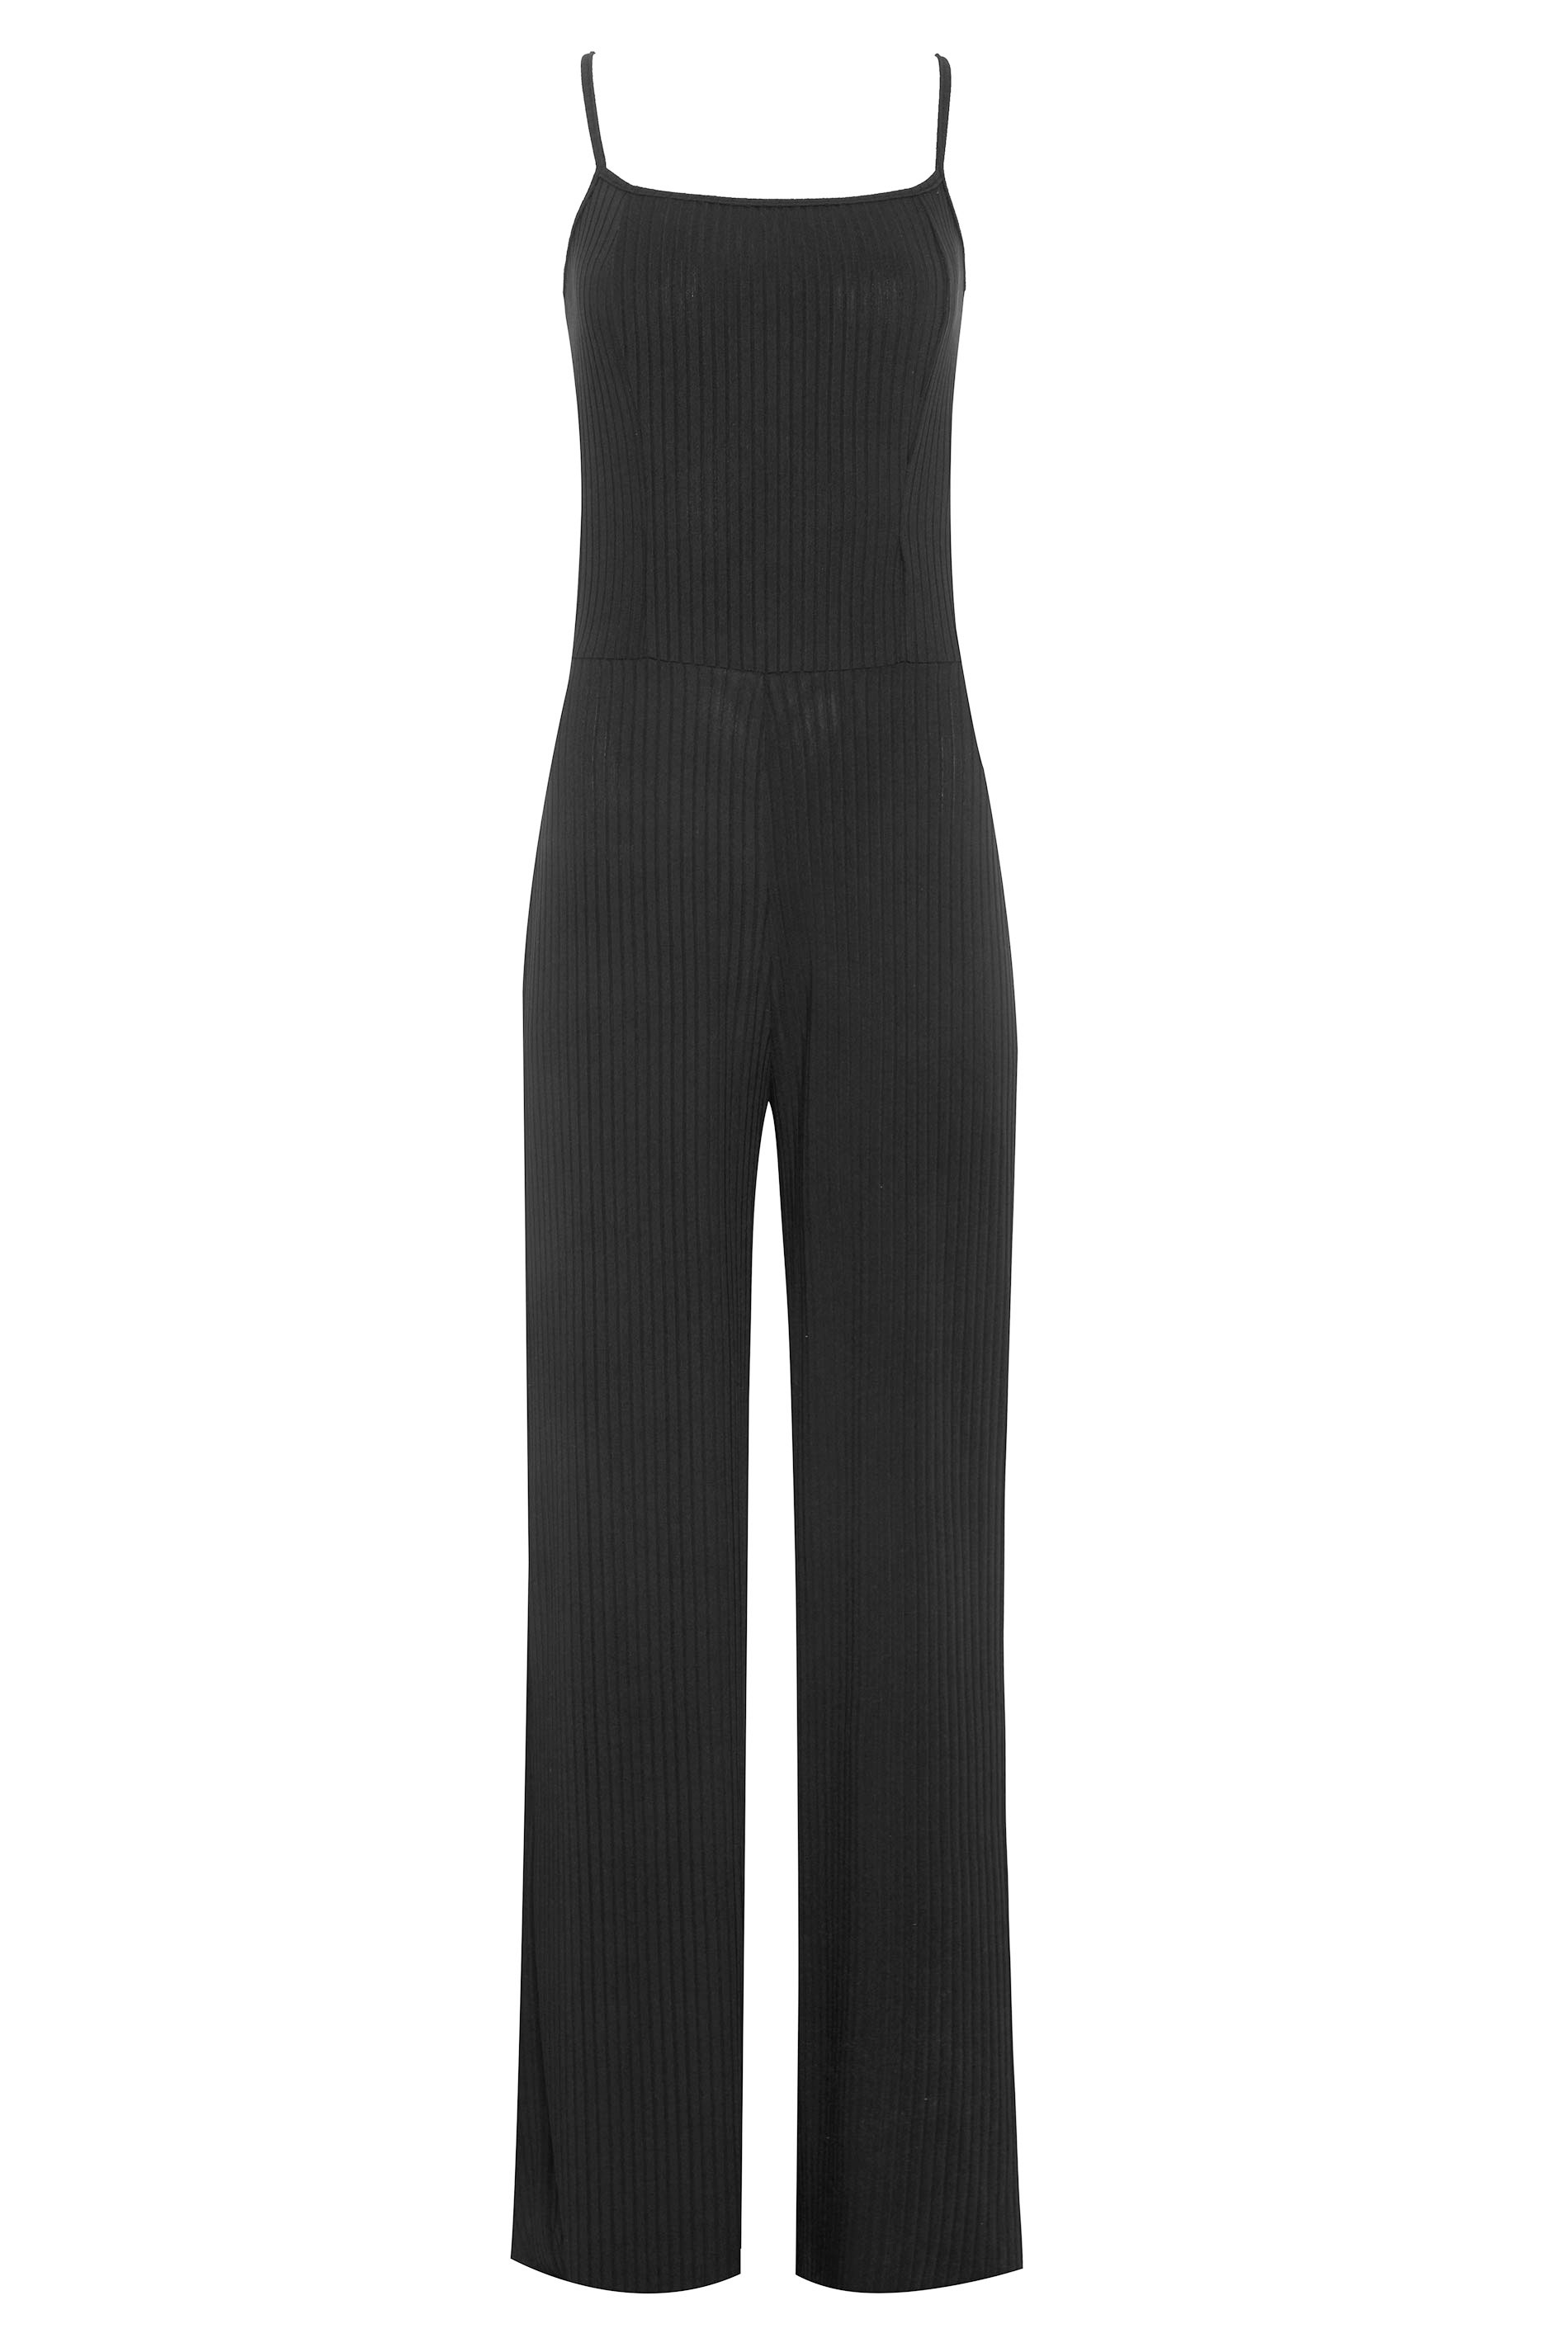 LTS Black Ribbed Wide Leg Jumpsuit | Long Tall Sally